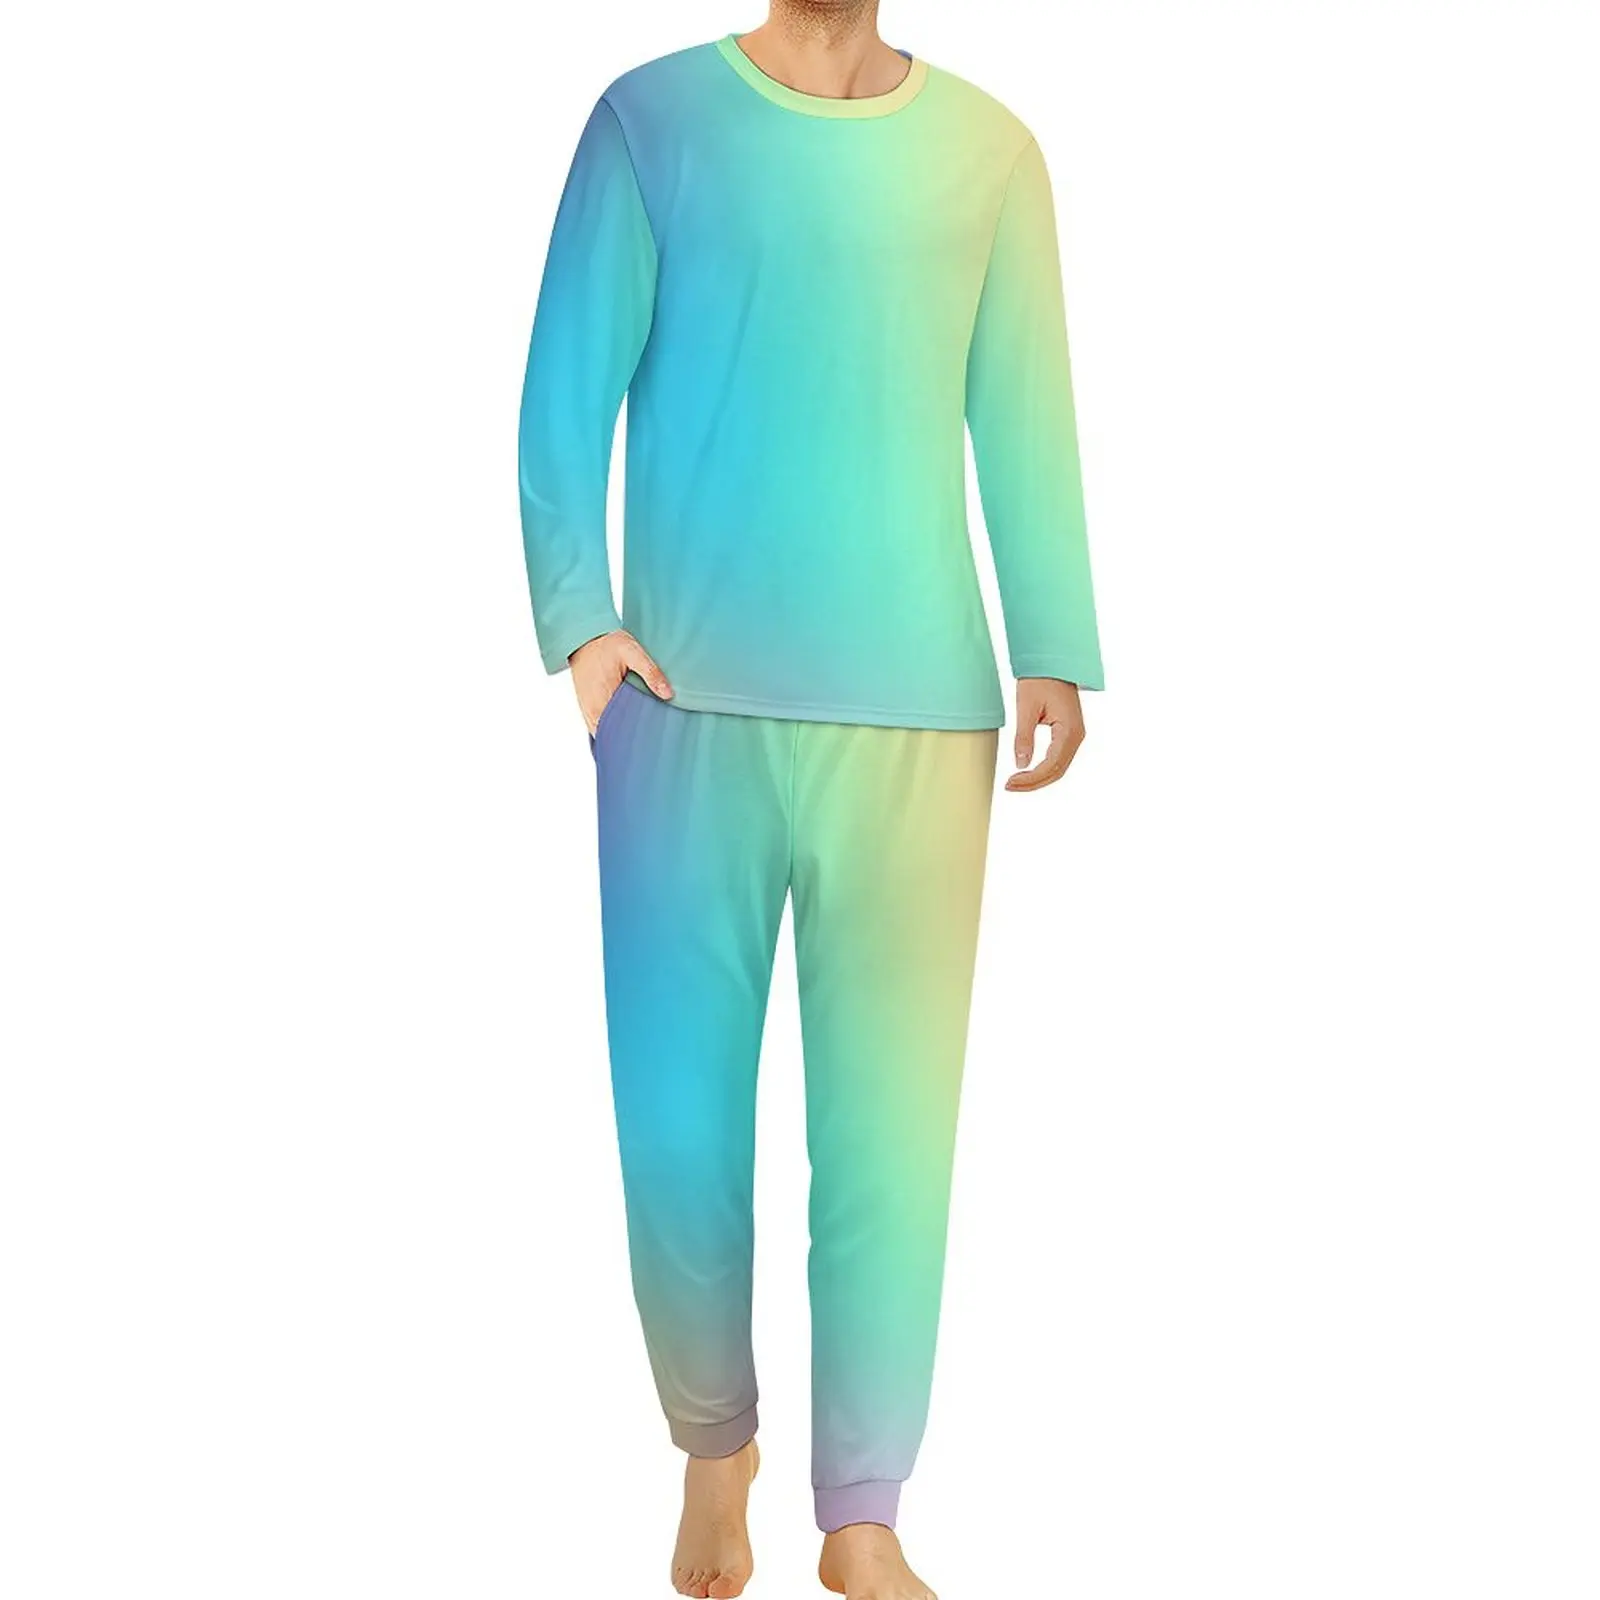 Pastel Ombre Pajamas Men Rainbow Print Lovely Home Suit Spring Long Sleeve 2 Pieces Aesthetic Pajama Sets Big Size 4XL 5XL